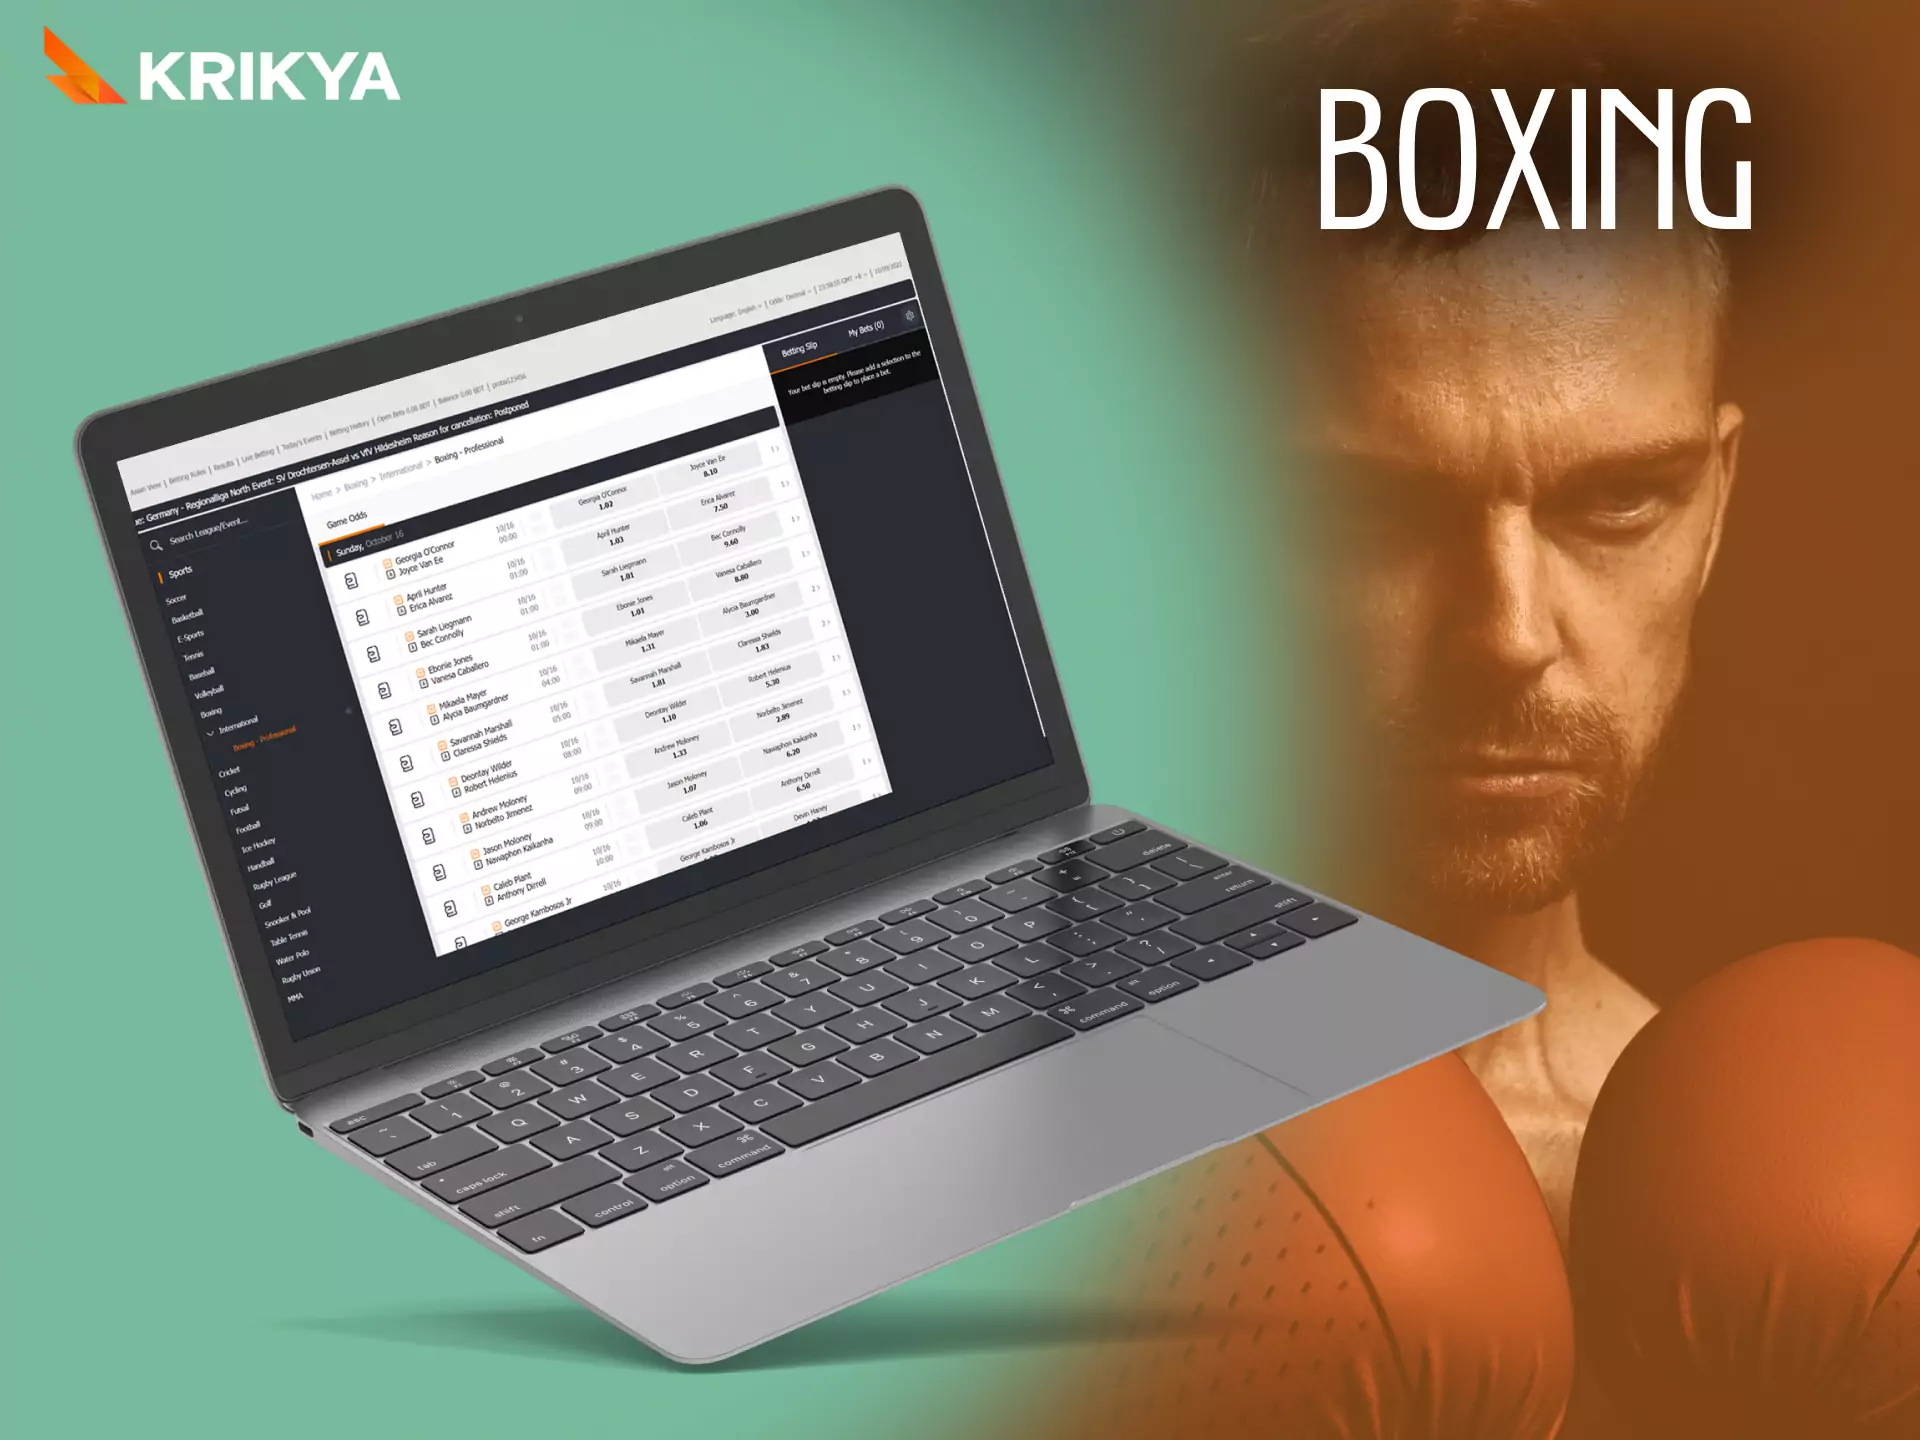 Support your favorite boxers on Krikya, place bets.